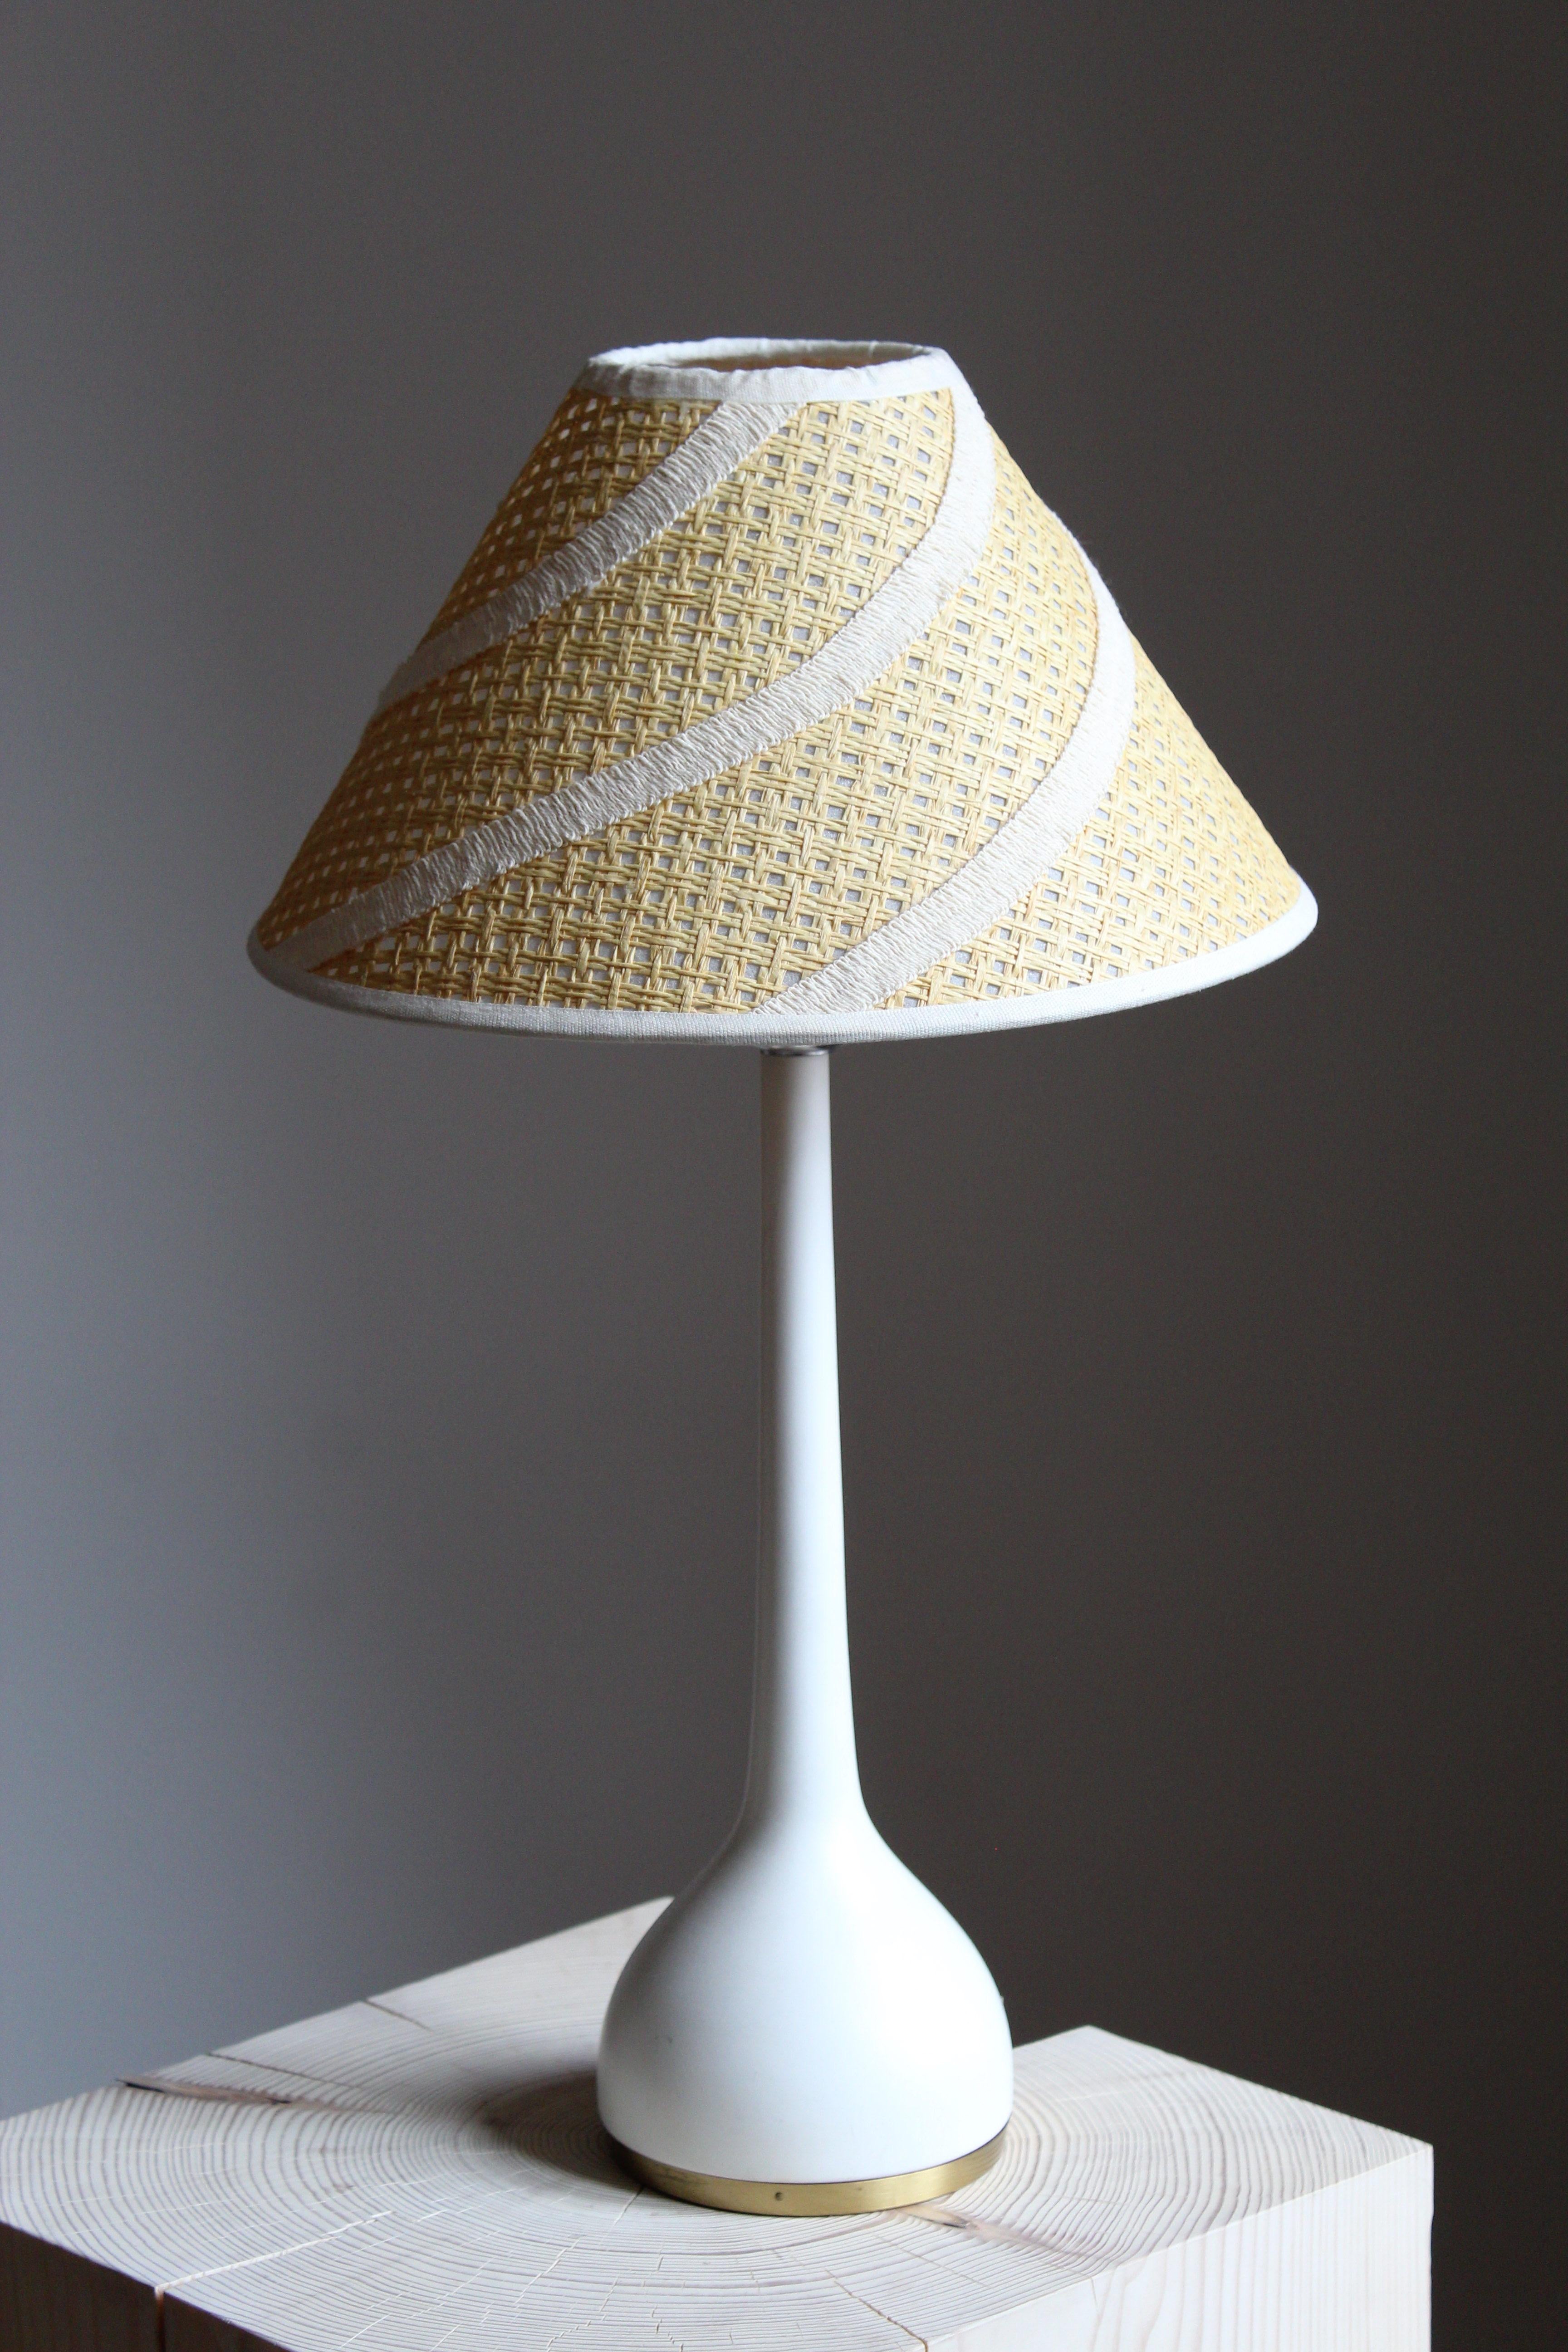 A table lamp designed and produced by Hans-Agne Jakobsson, Markaryd, Sweden, 1970s. 

Other designers of the period include Paavo Tynell, Hans Bergström, Josef Frank, Alvar Aalto, and Finn Juhl.